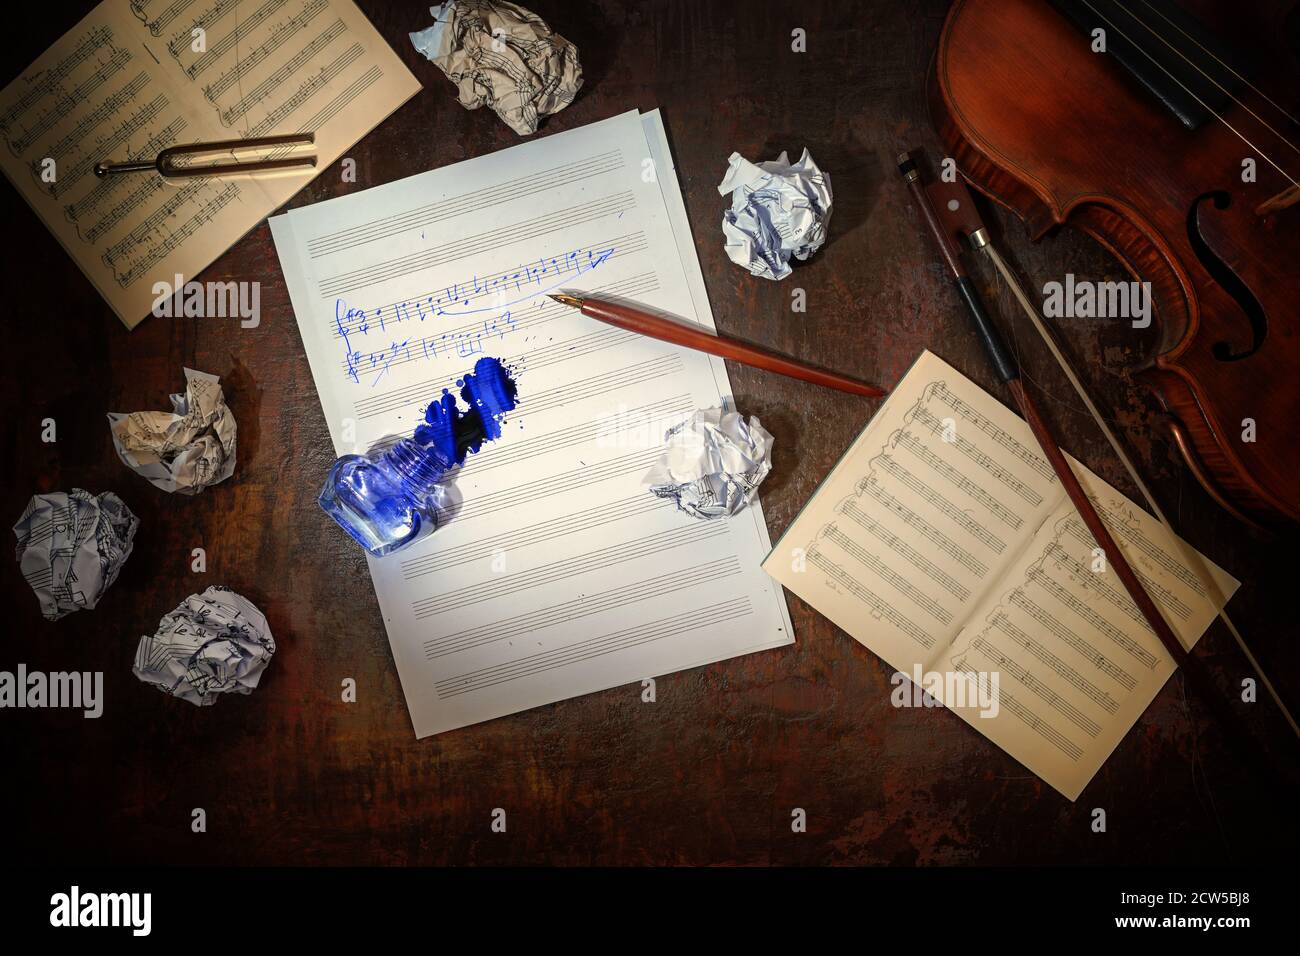 Violin, plain and crumpled sheet of music, handwritten beginning of a musical composition and a overturned inkwell on a dark brown table, workplace of Stock Photo